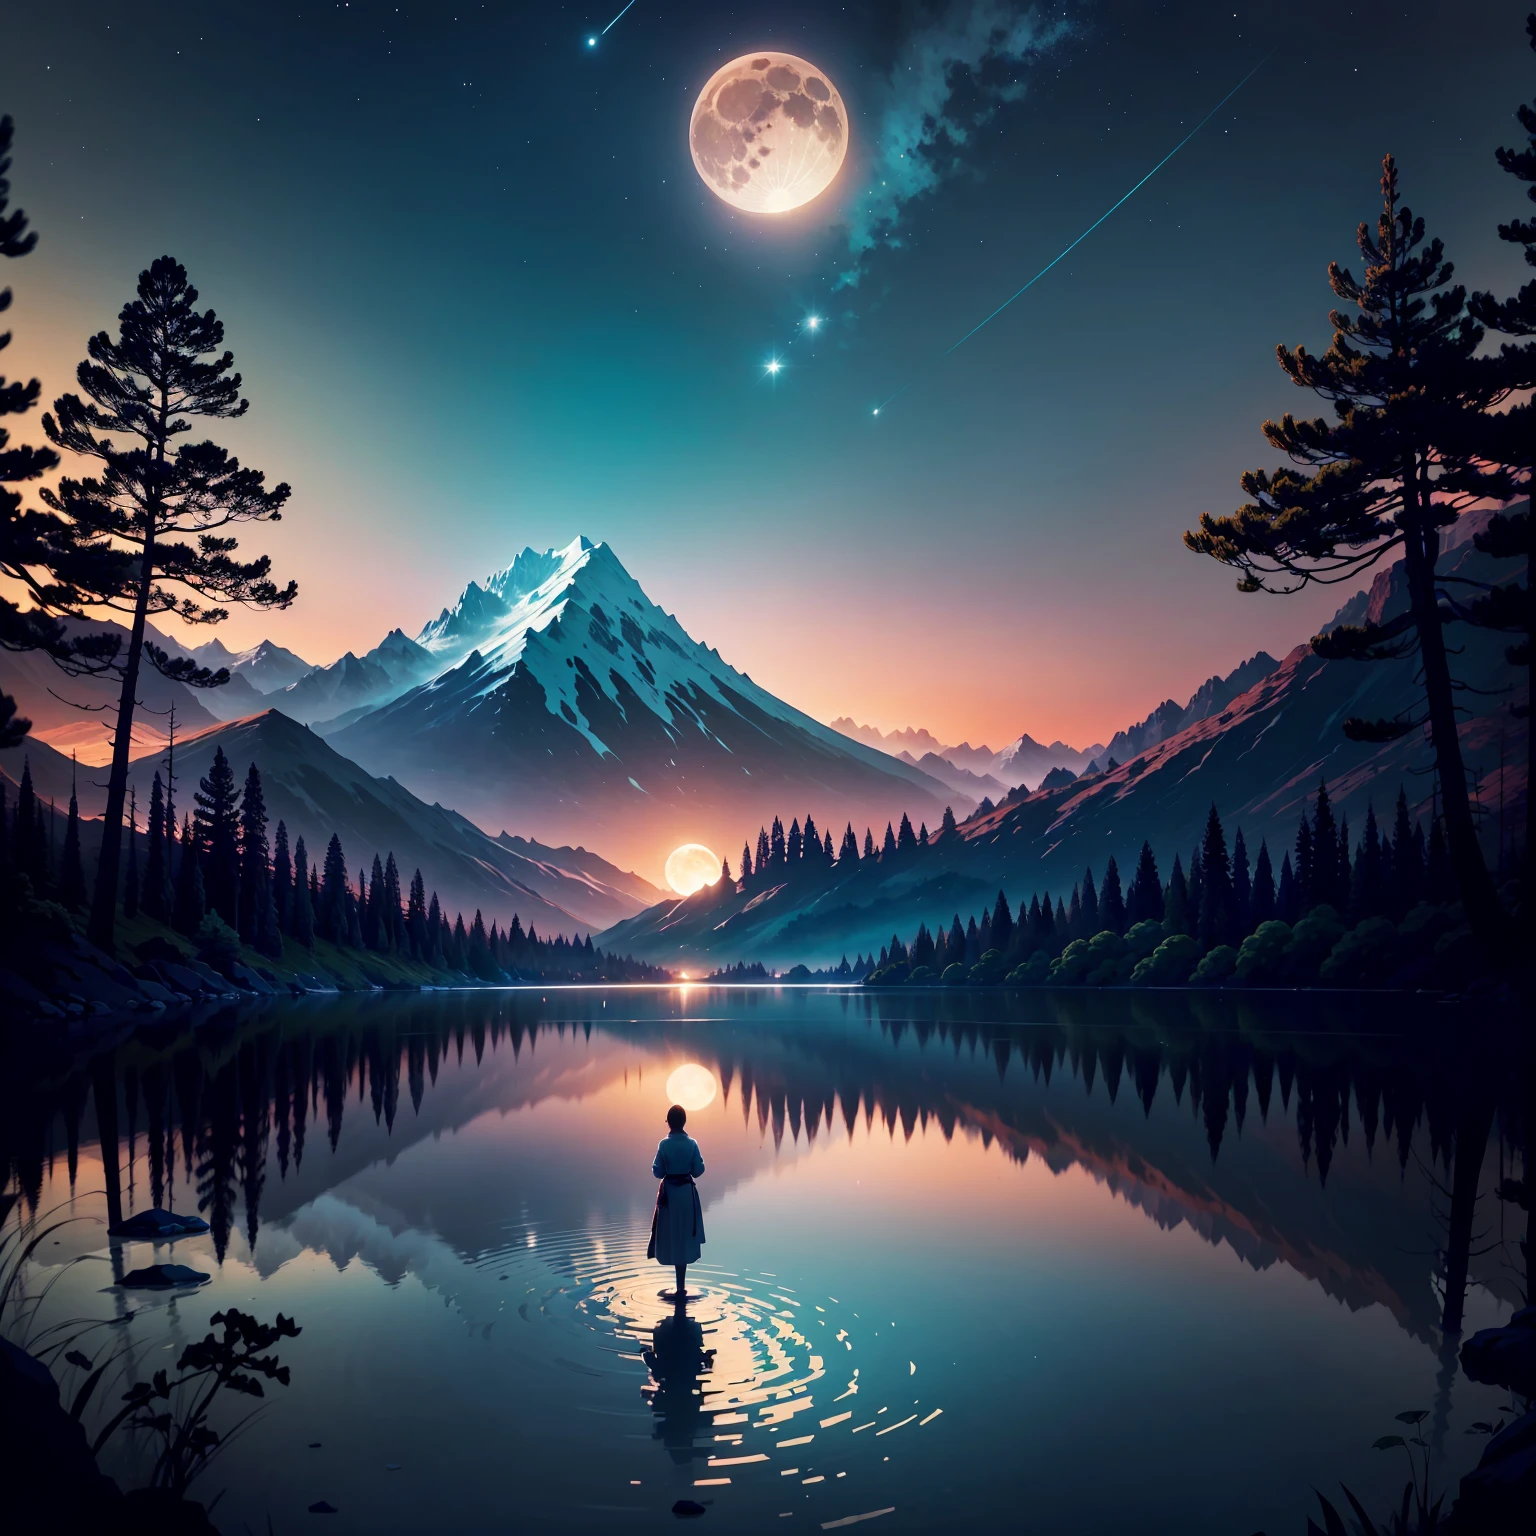 Here is a description of the scene in the style of a Japanese adventure animation: The screen opens up to a breathtaking landscape, with towering mountains in the background and a night sky dotted with twinkling stars. The environment is wrapped in a magical and serene atmosphere, while a gentle breeze swings the grass and trees. In the background we see a hill, the horizon illuminated by the full and radiant moon. The moon emits an intense silver glow, bathing the landscape in a soft, mysterious light. The reflection of the moon is reflected in the character's eyes, bringing an air of wonder and desire for discovery. The wind subtly blows the trees, giving movement and dynamism to the scene. The entire scene is animated with vibrant colors and subtle contrasts, highlighting the beauty of the scenery and the aura of mystery of the moon.
The soft soundtrack, with traditional Japanese instruments, echoes in the background,
increasing the sense of impending adventure.
This Japanese animated scene captures the excitement and grandeur of an epic journey, as the main character faces the moonlit horizon, Ready to embark on an incredible adventure full of challenges and discoveries.